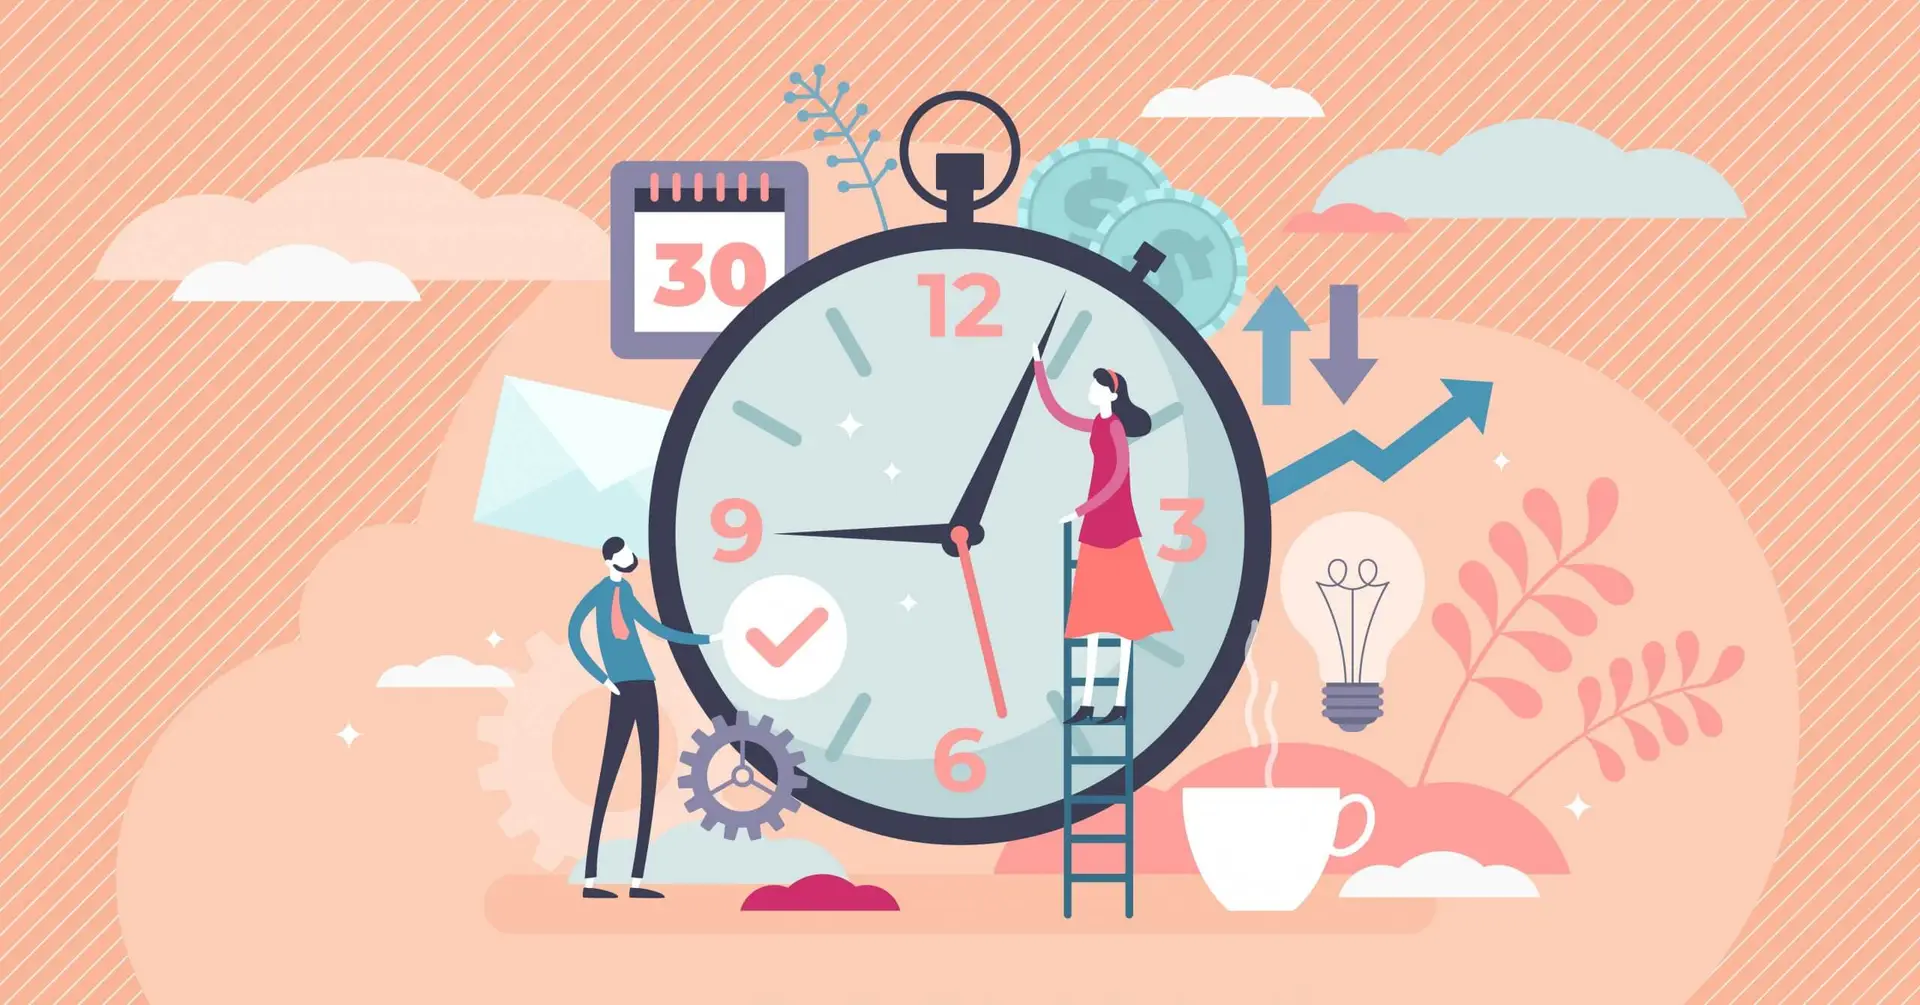 Time management concept, flat tiny persons vector illustration